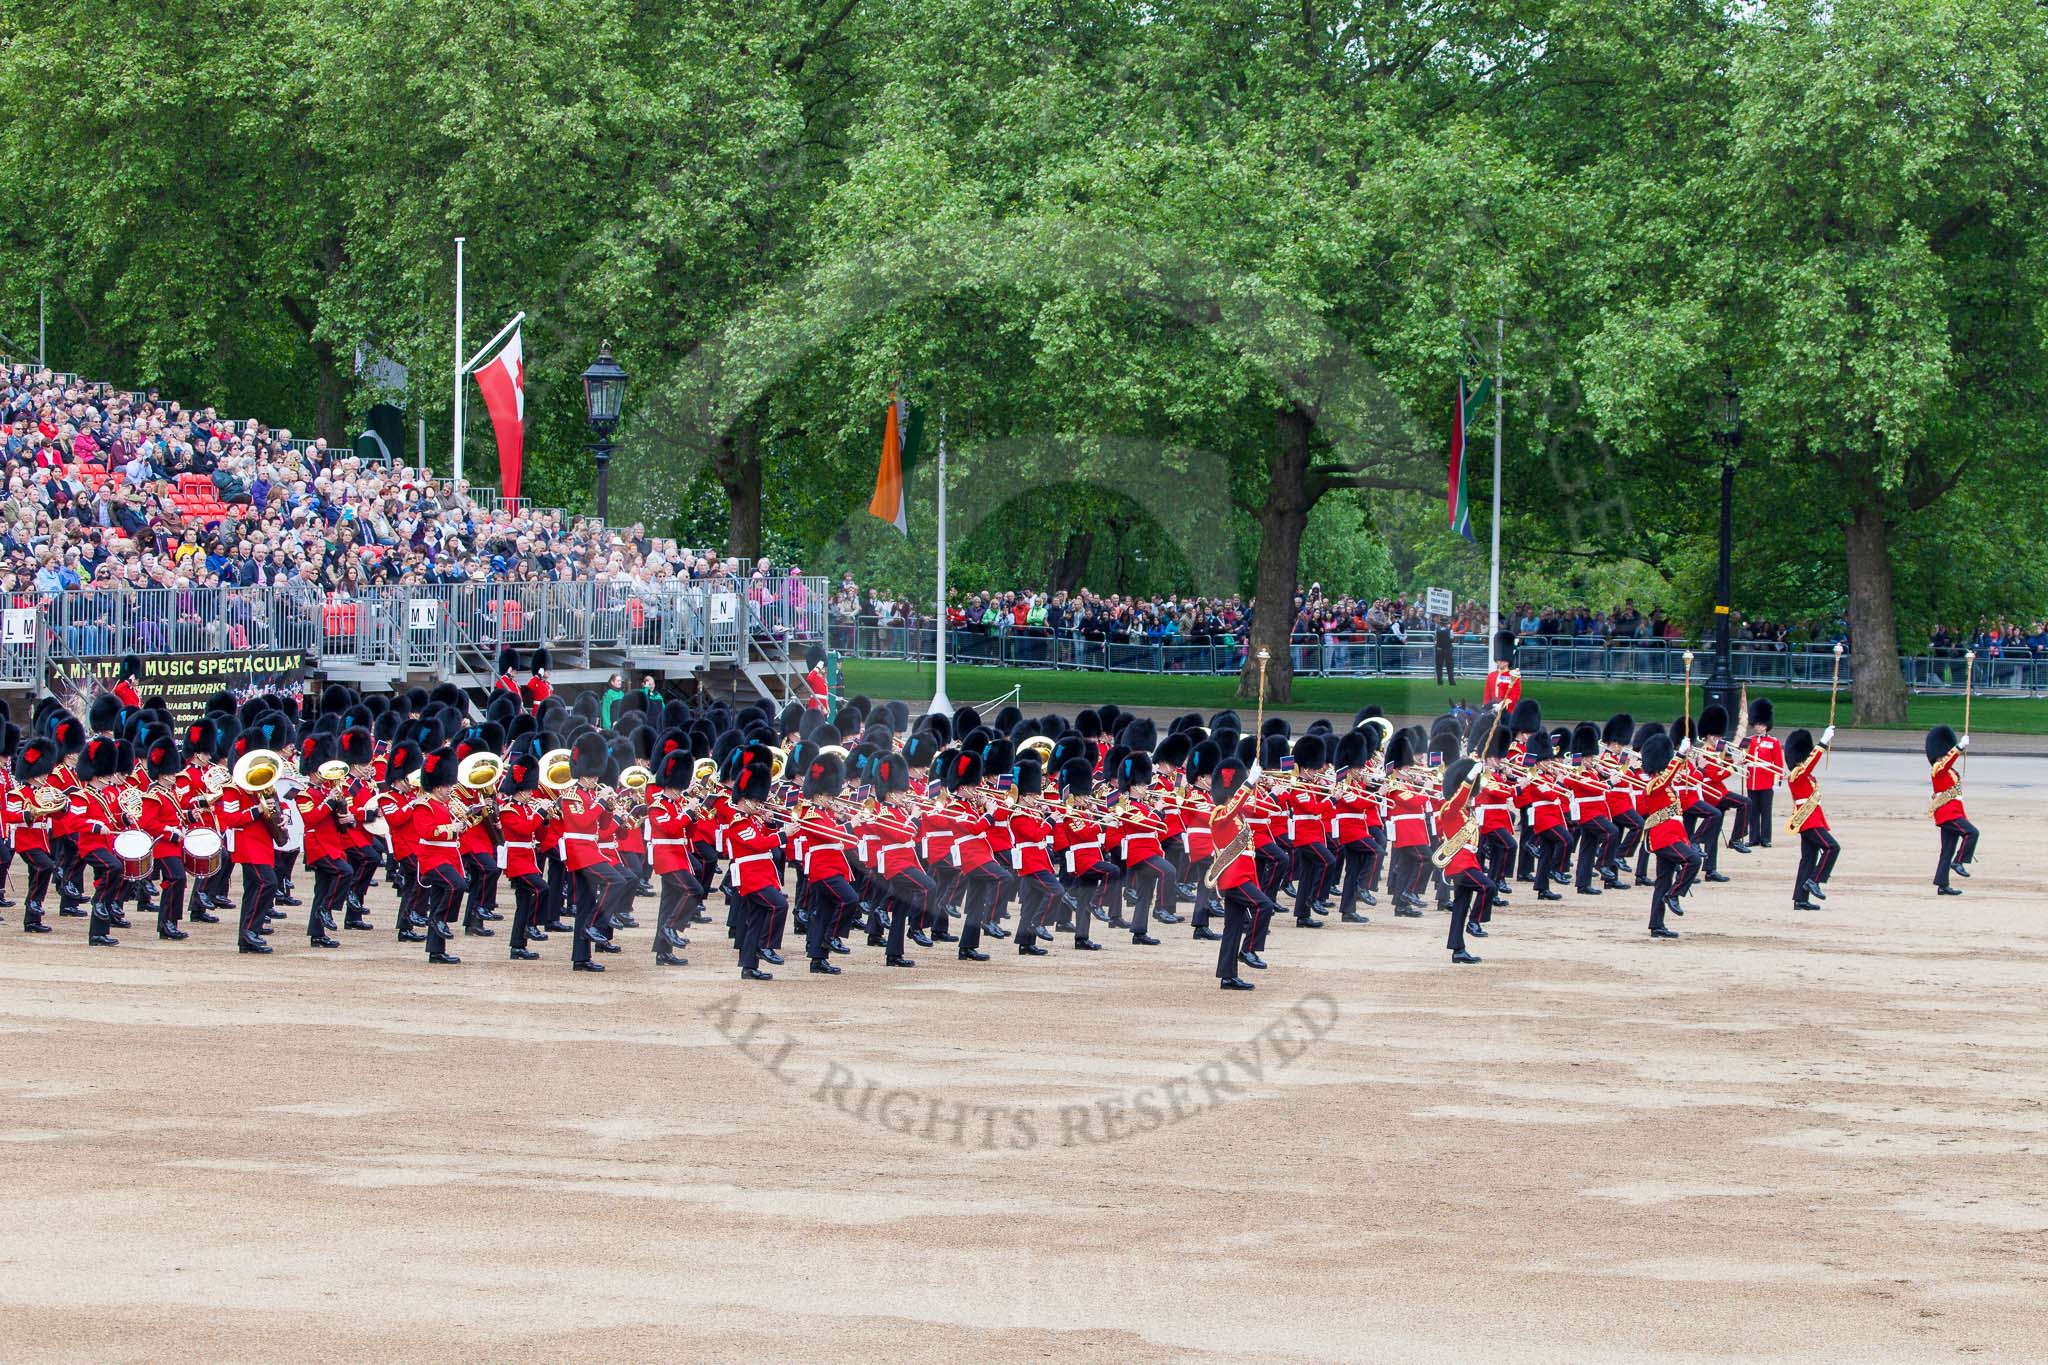 Major General's Review 2013: The Massed Bands, led by the five Drum Majors..
Horse Guards Parade, Westminster,
London SW1,

United Kingdom,
on 01 June 2013 at 11:25, image #434